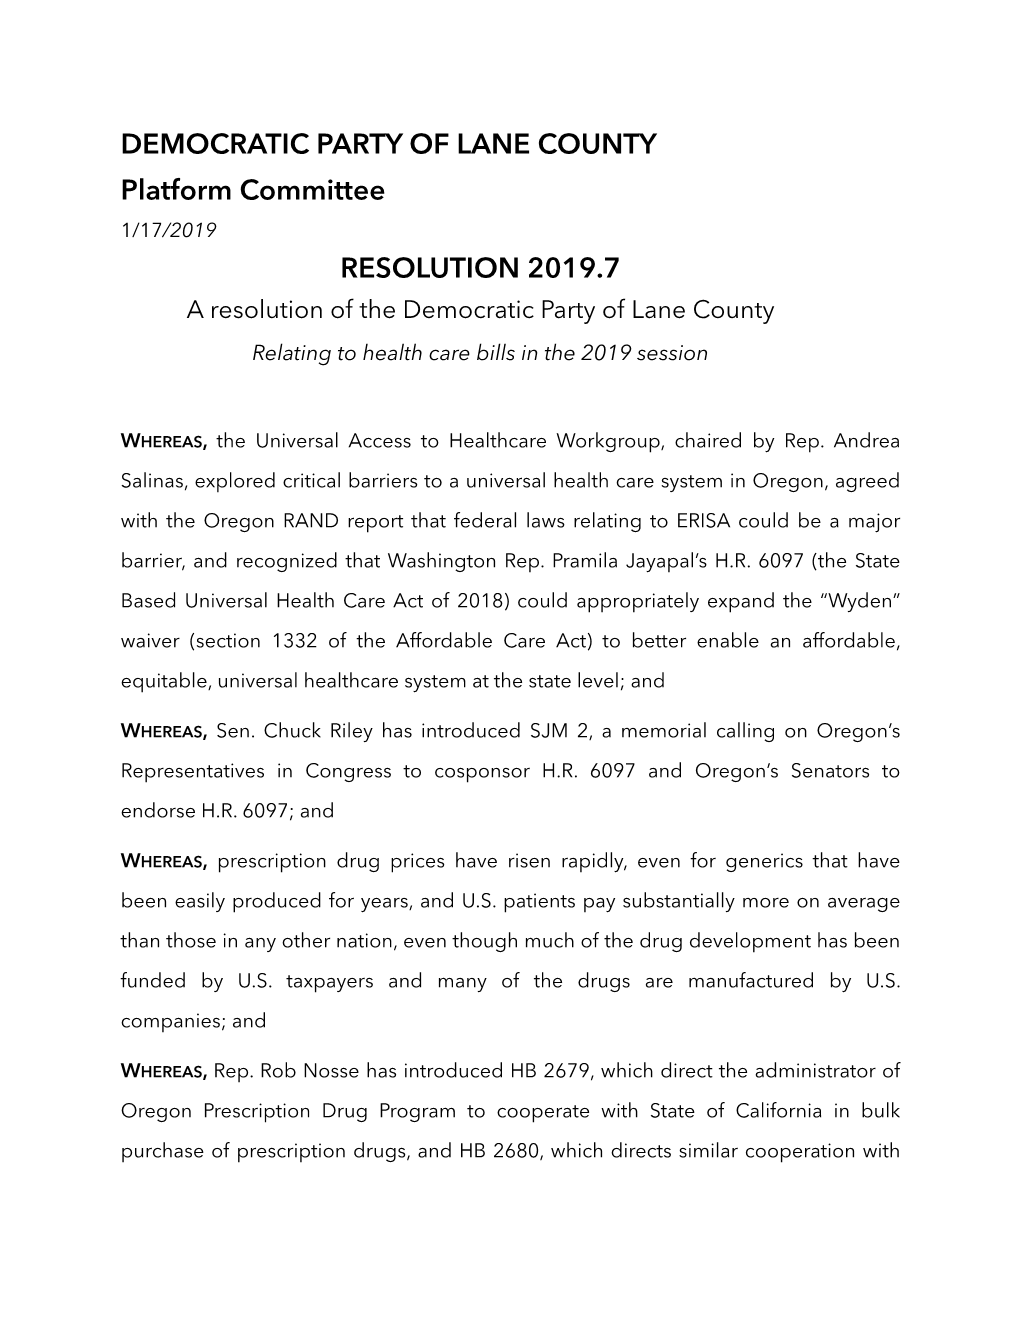 Resolution 2019.7 Relating to Health Care Bills in the 2019 Session